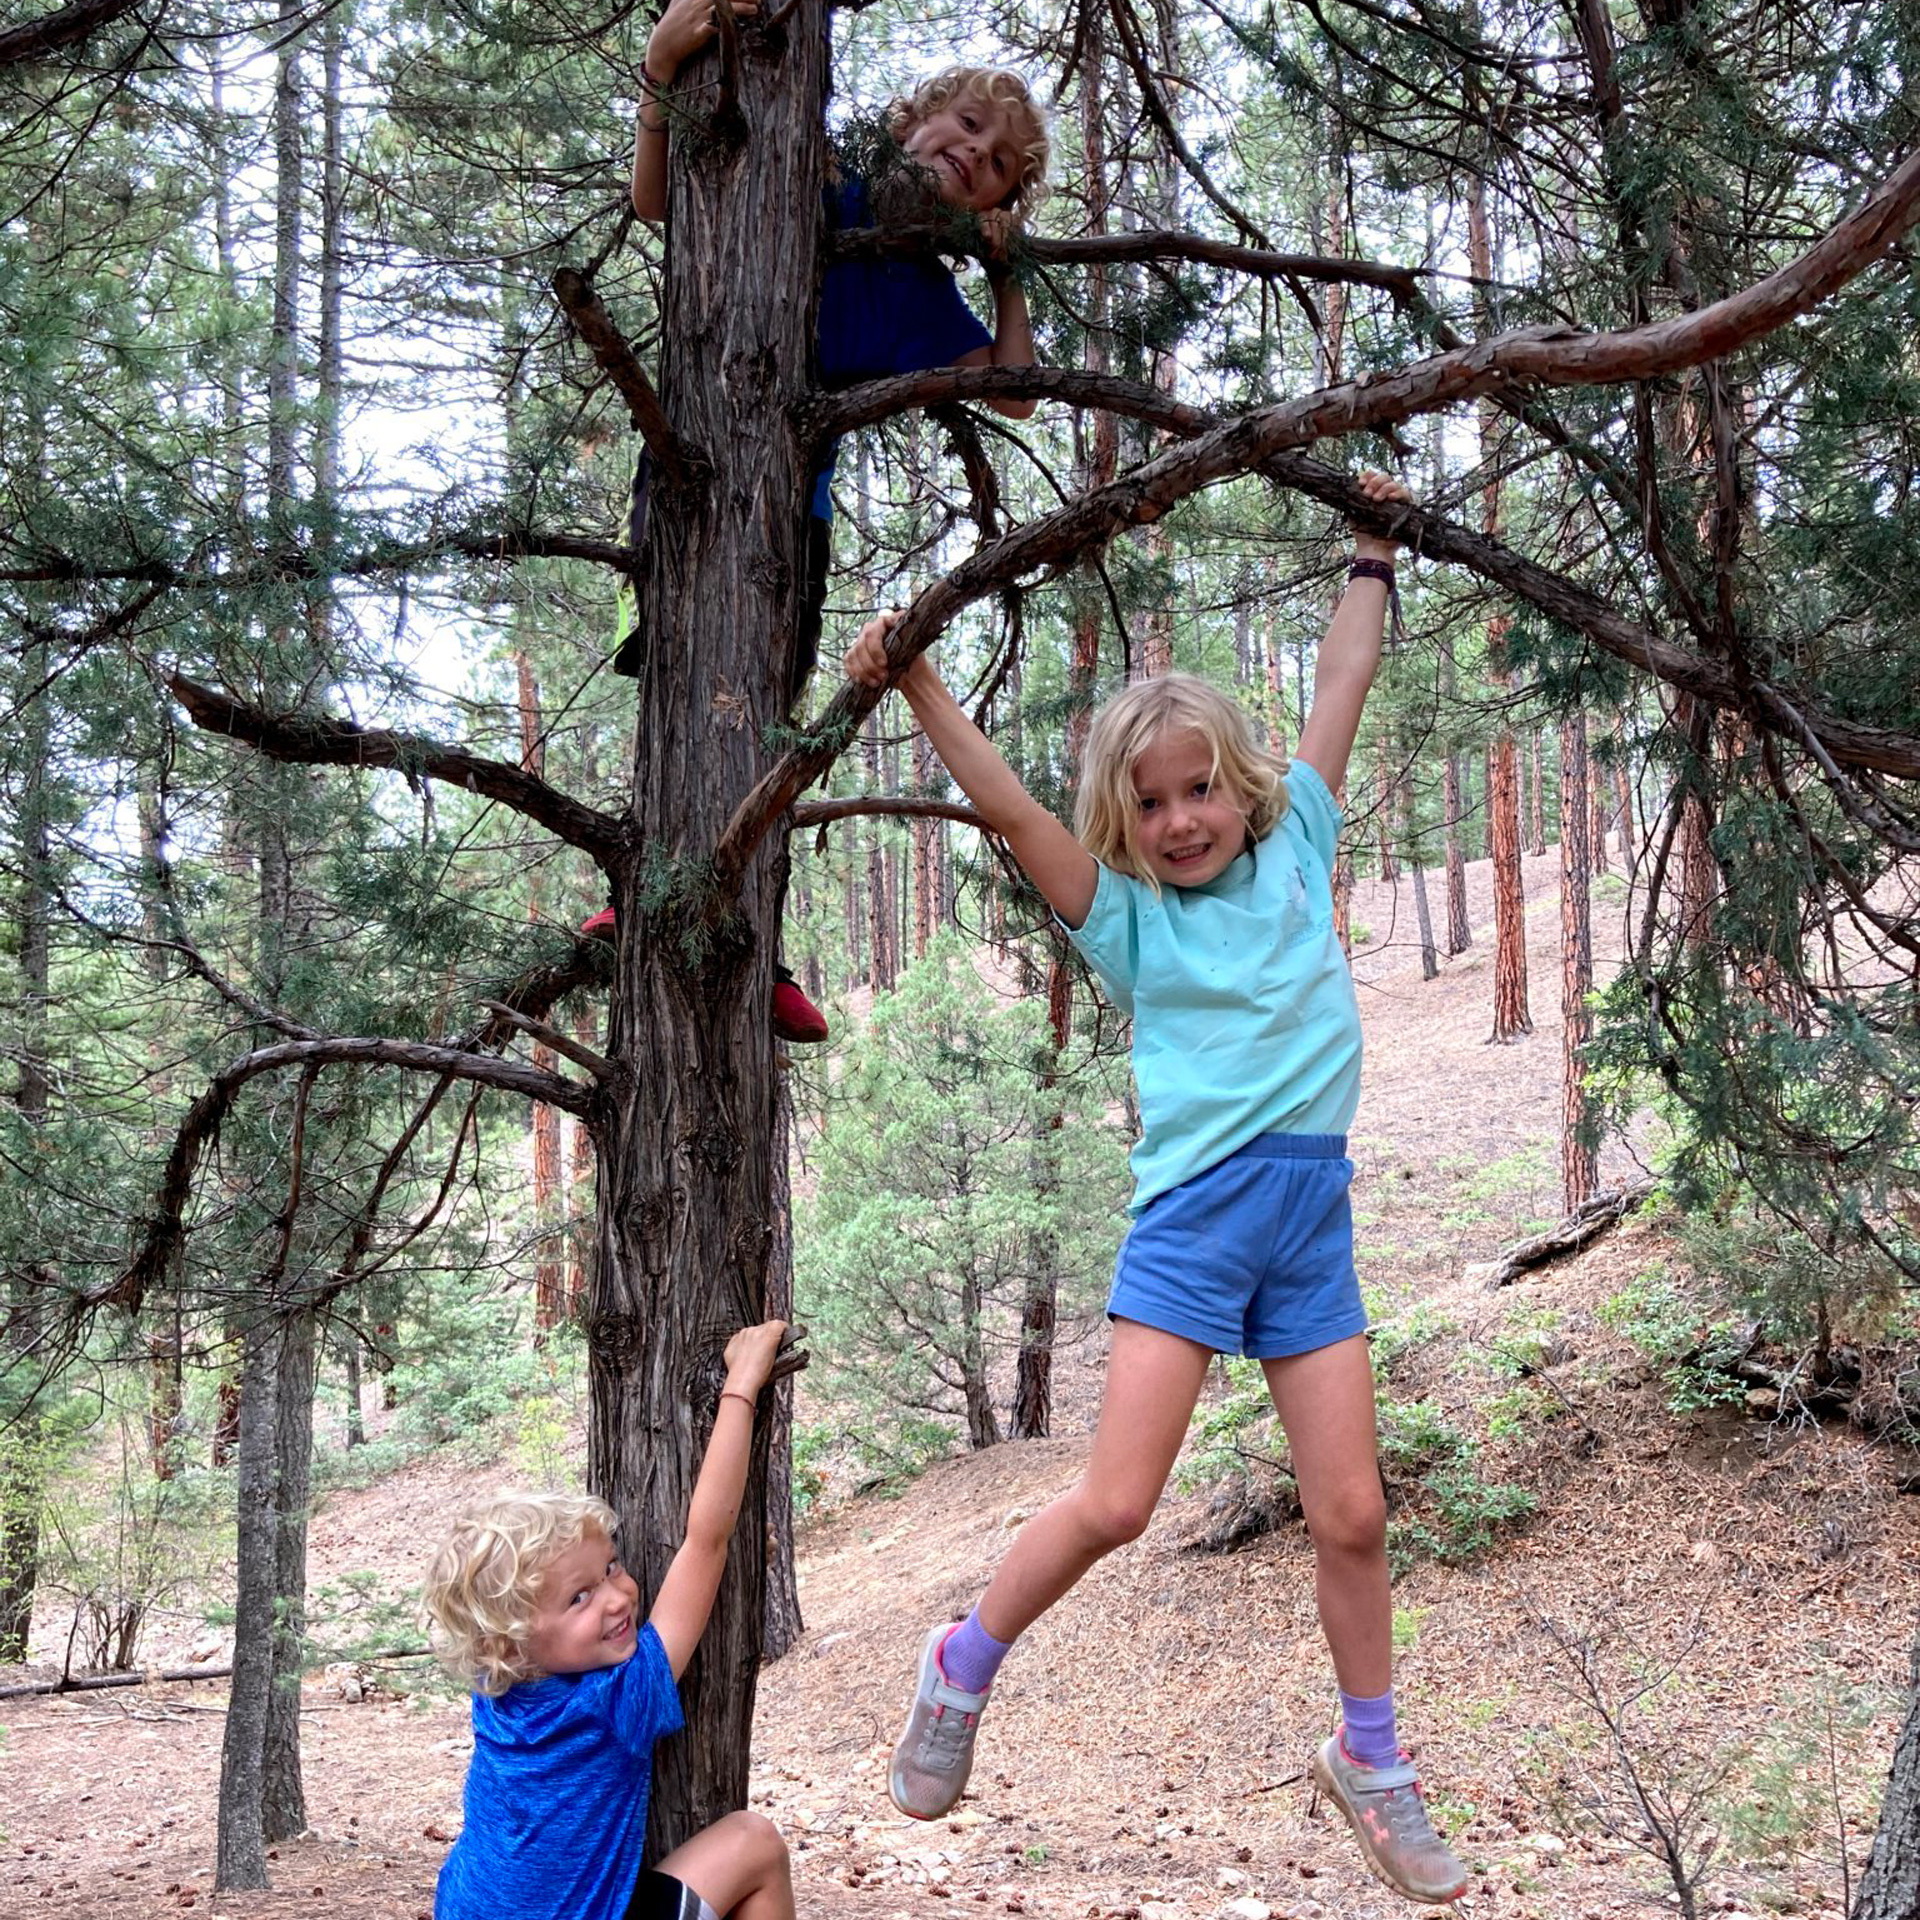 3 kids climbing in a tree in a woods.